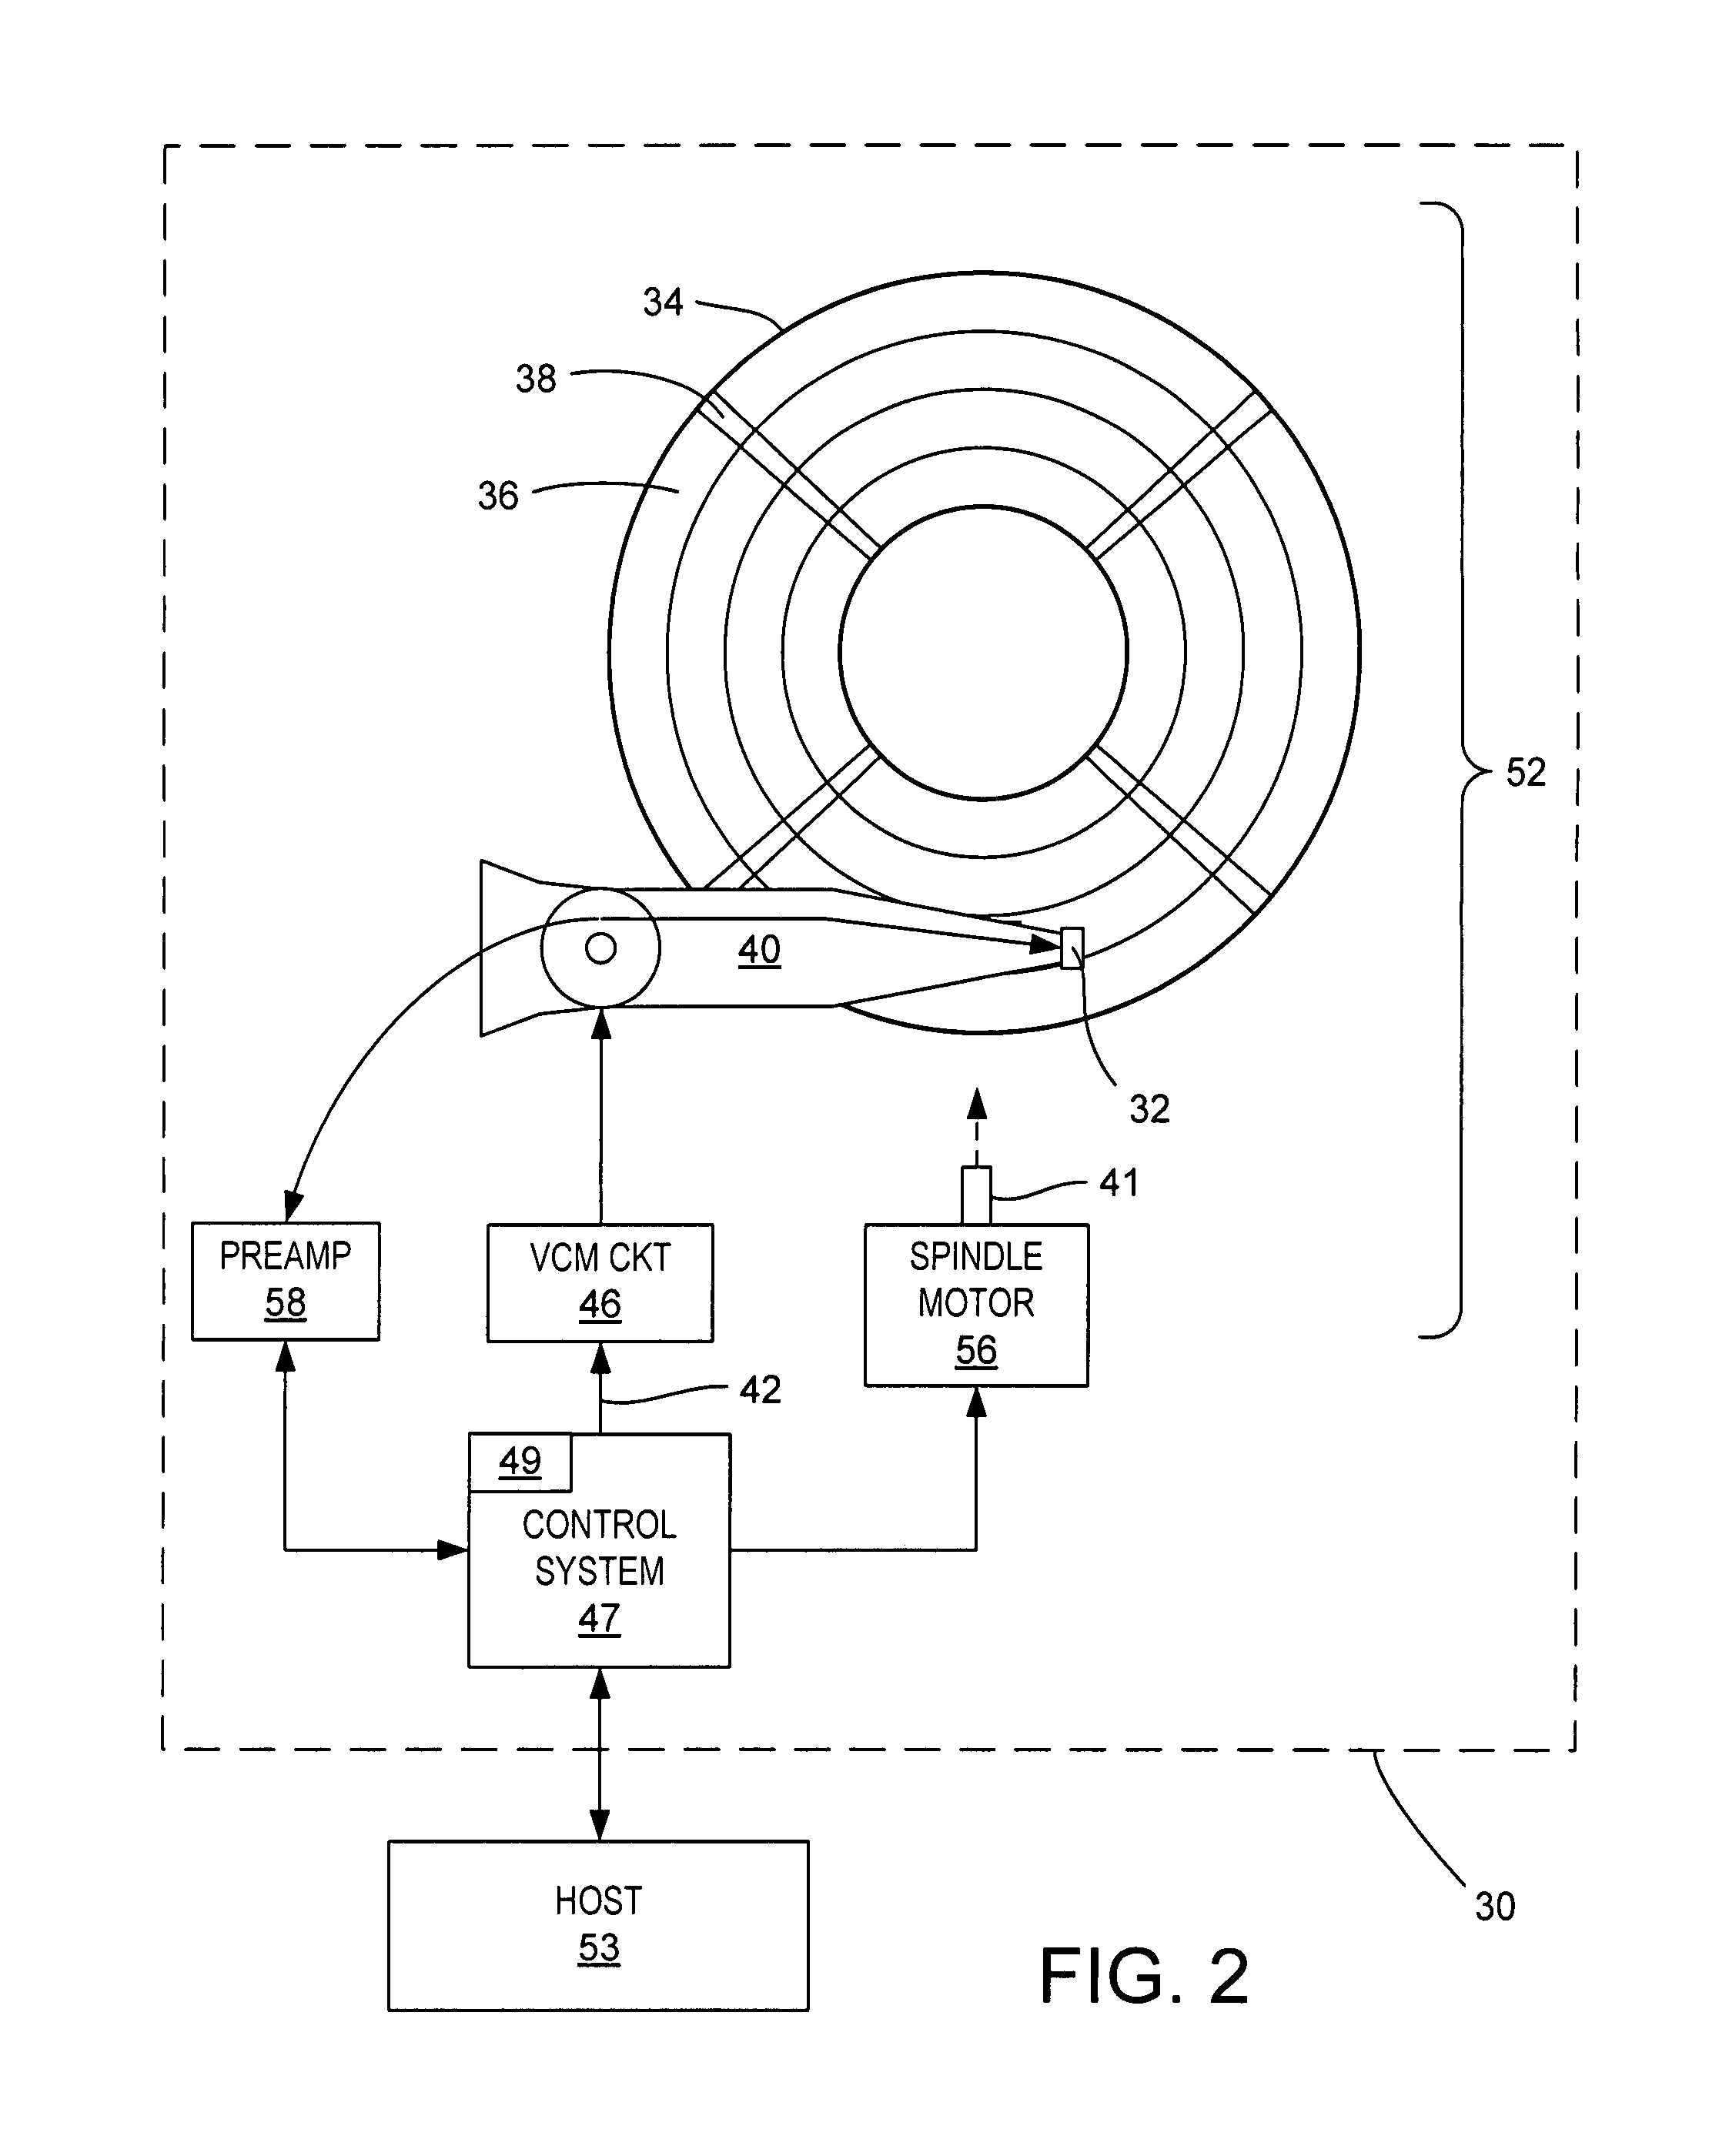 Method for improved repeatable runout learning in a disk drive